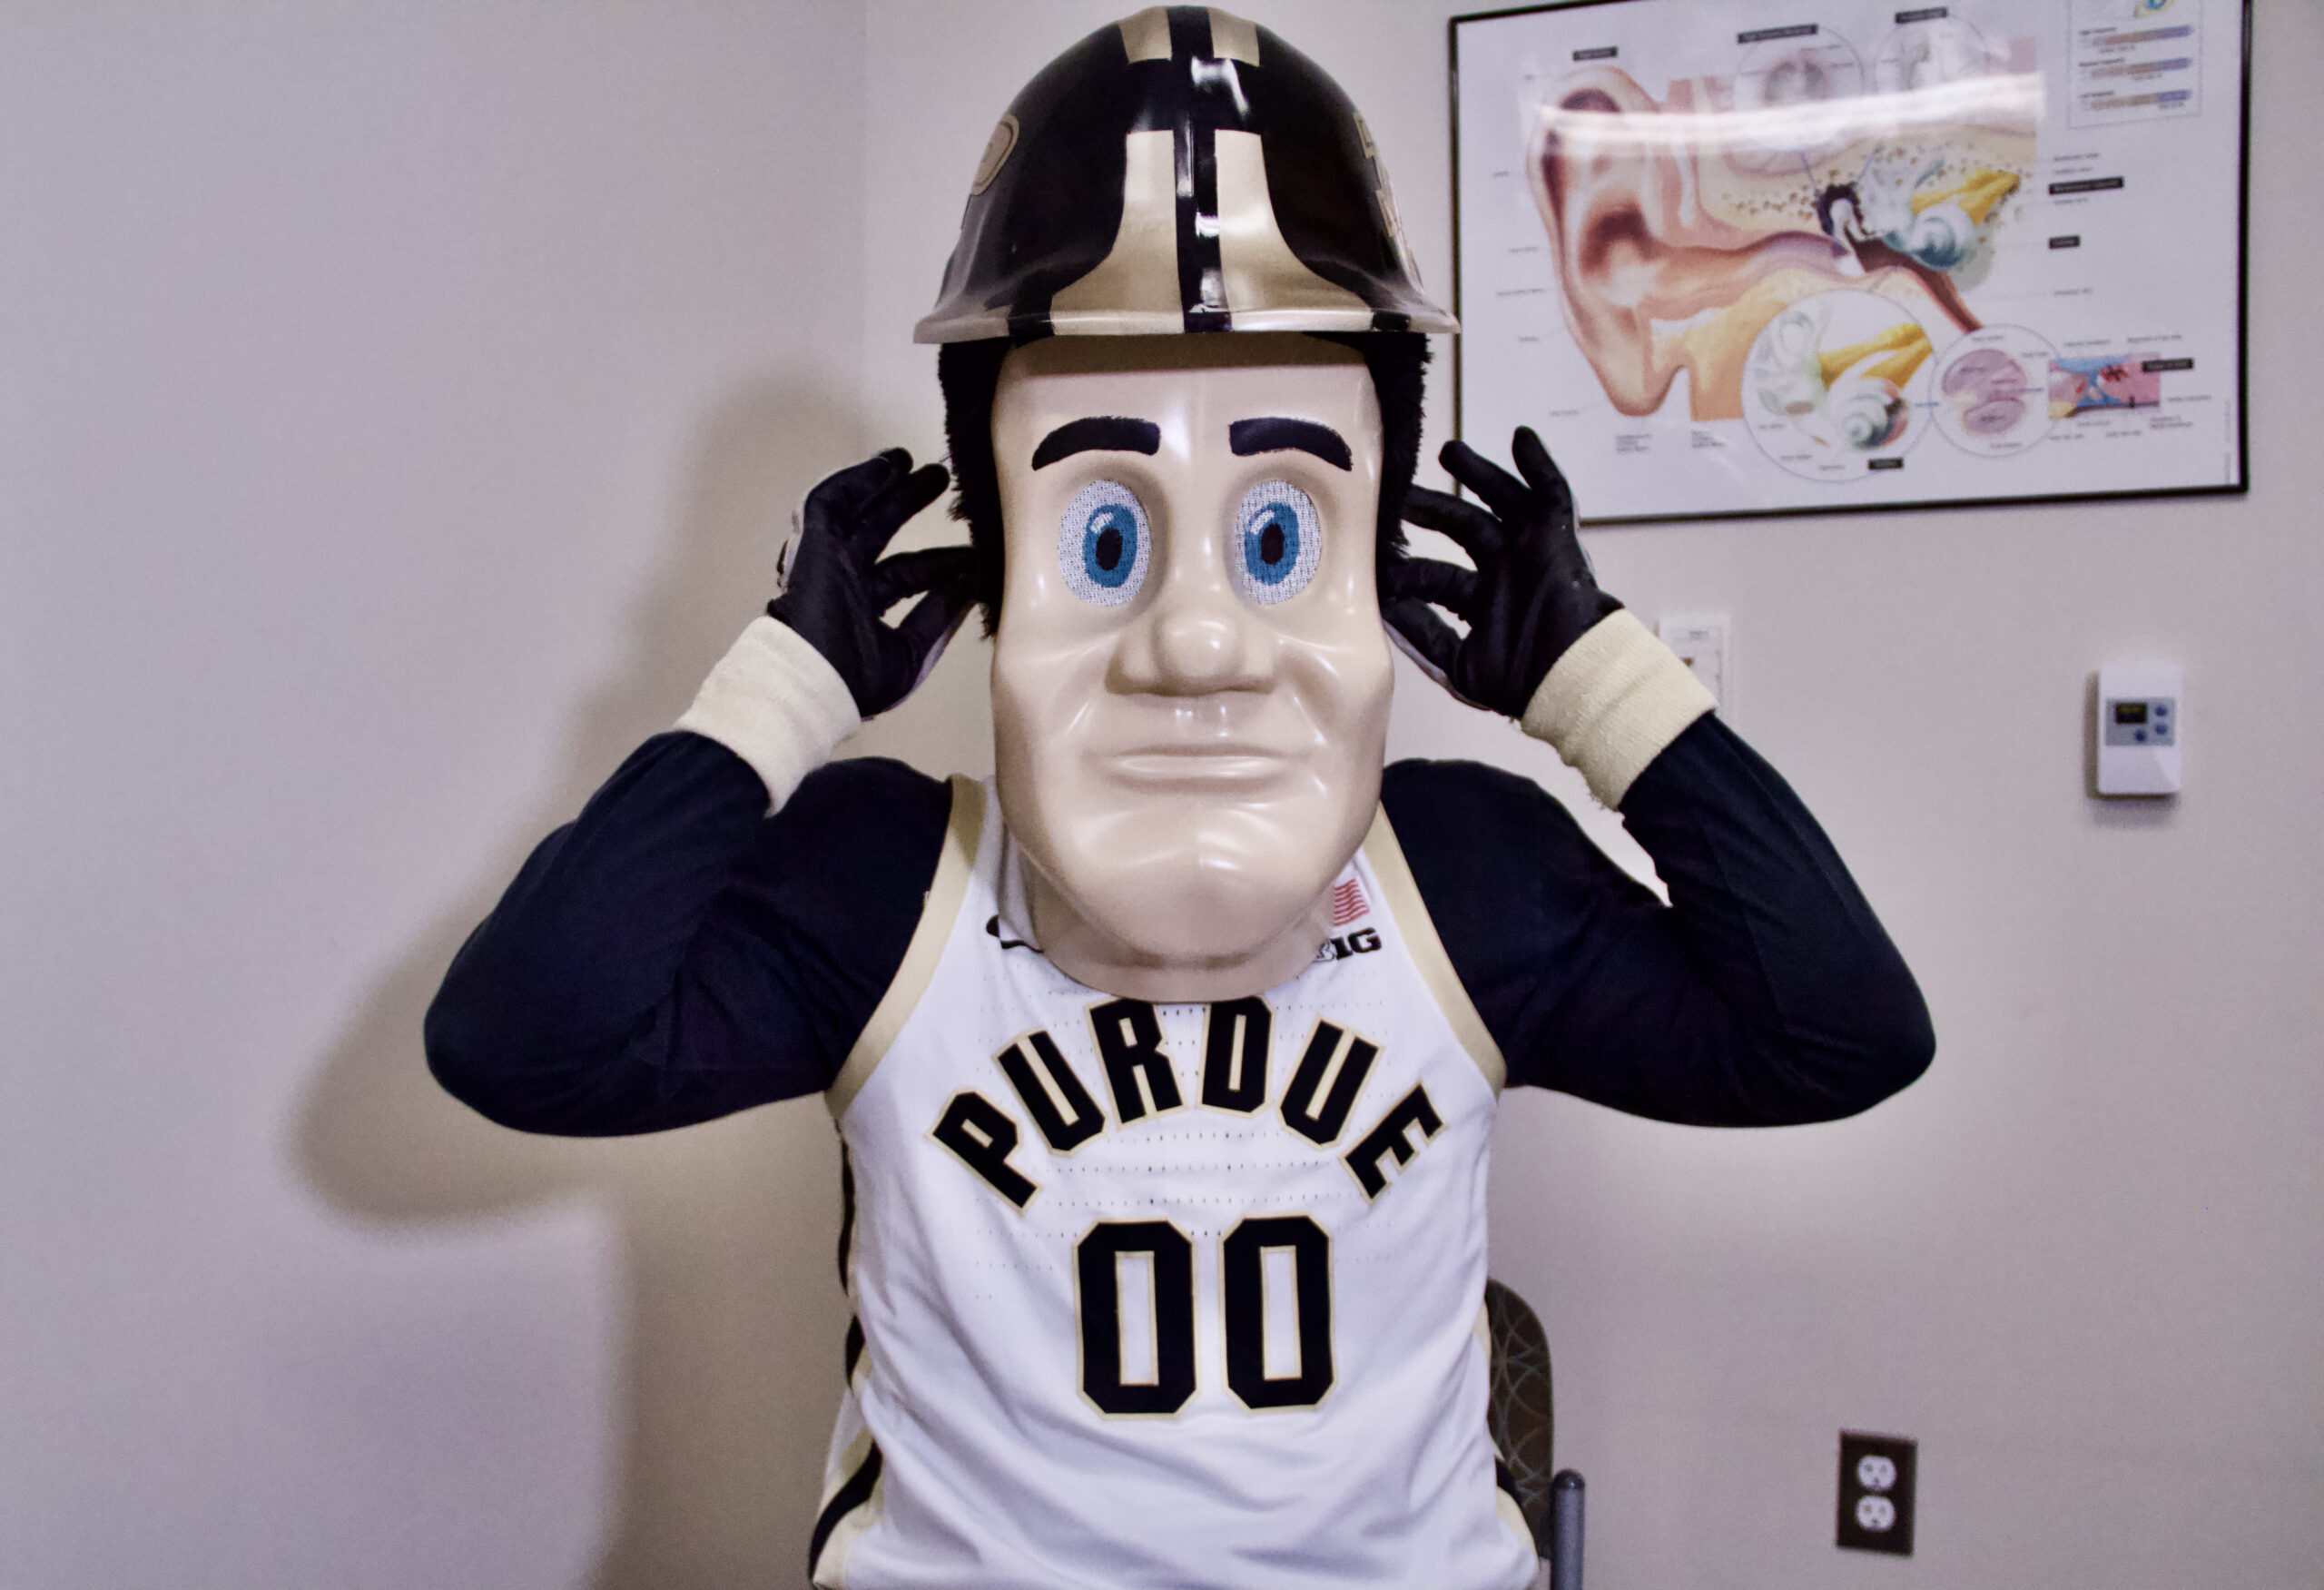 Purdue Pete puts in ear plugs in the M.D. Audiology Clinic.